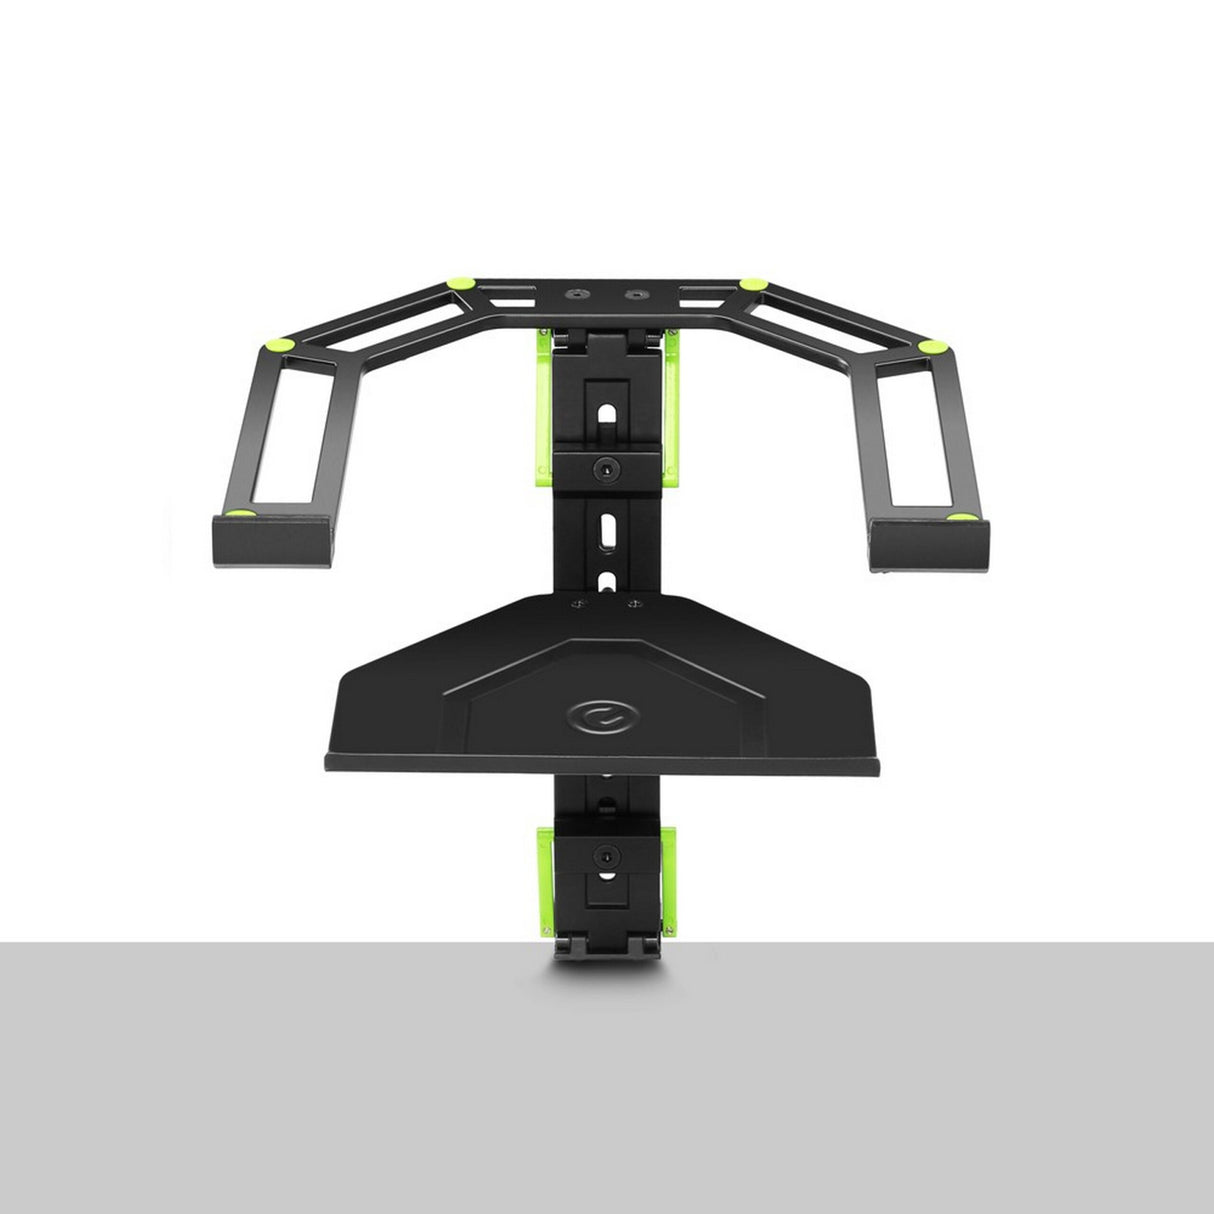 Gravity LTS 01 B Adjustable Laptop and Controller Stand